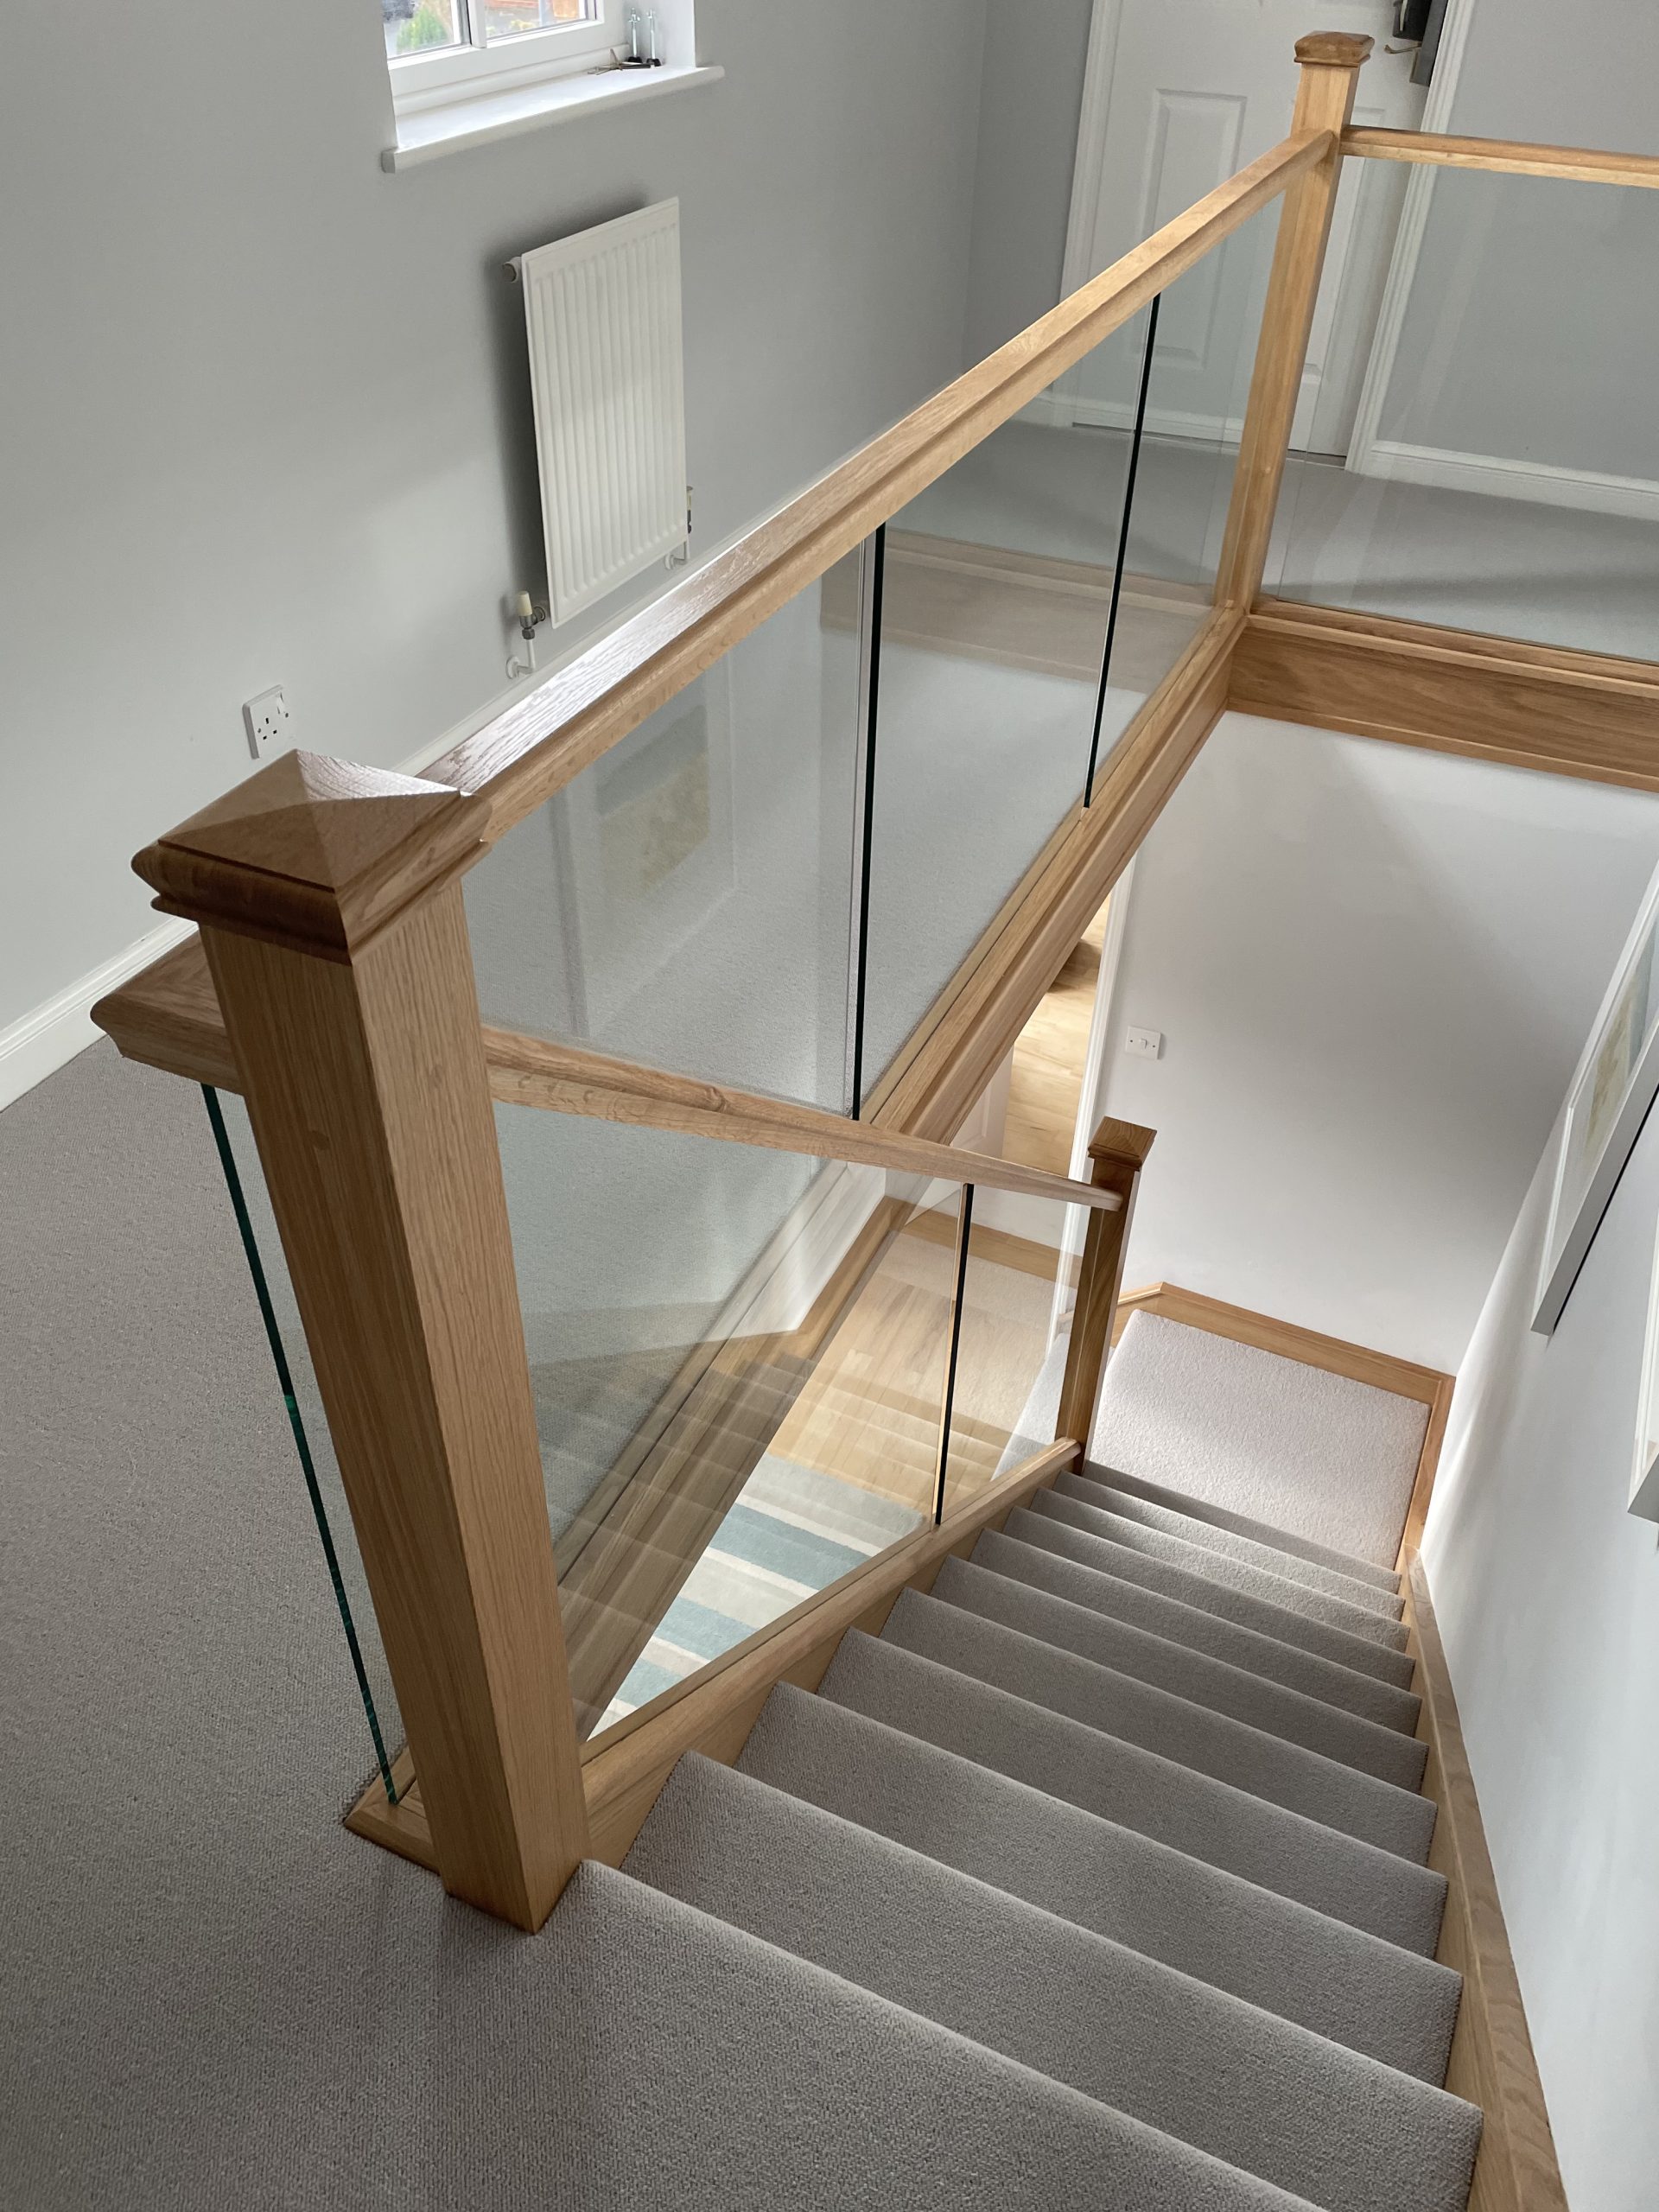 Abbott-Wade embedded oak and glass staircase renovation in Filton Bristol